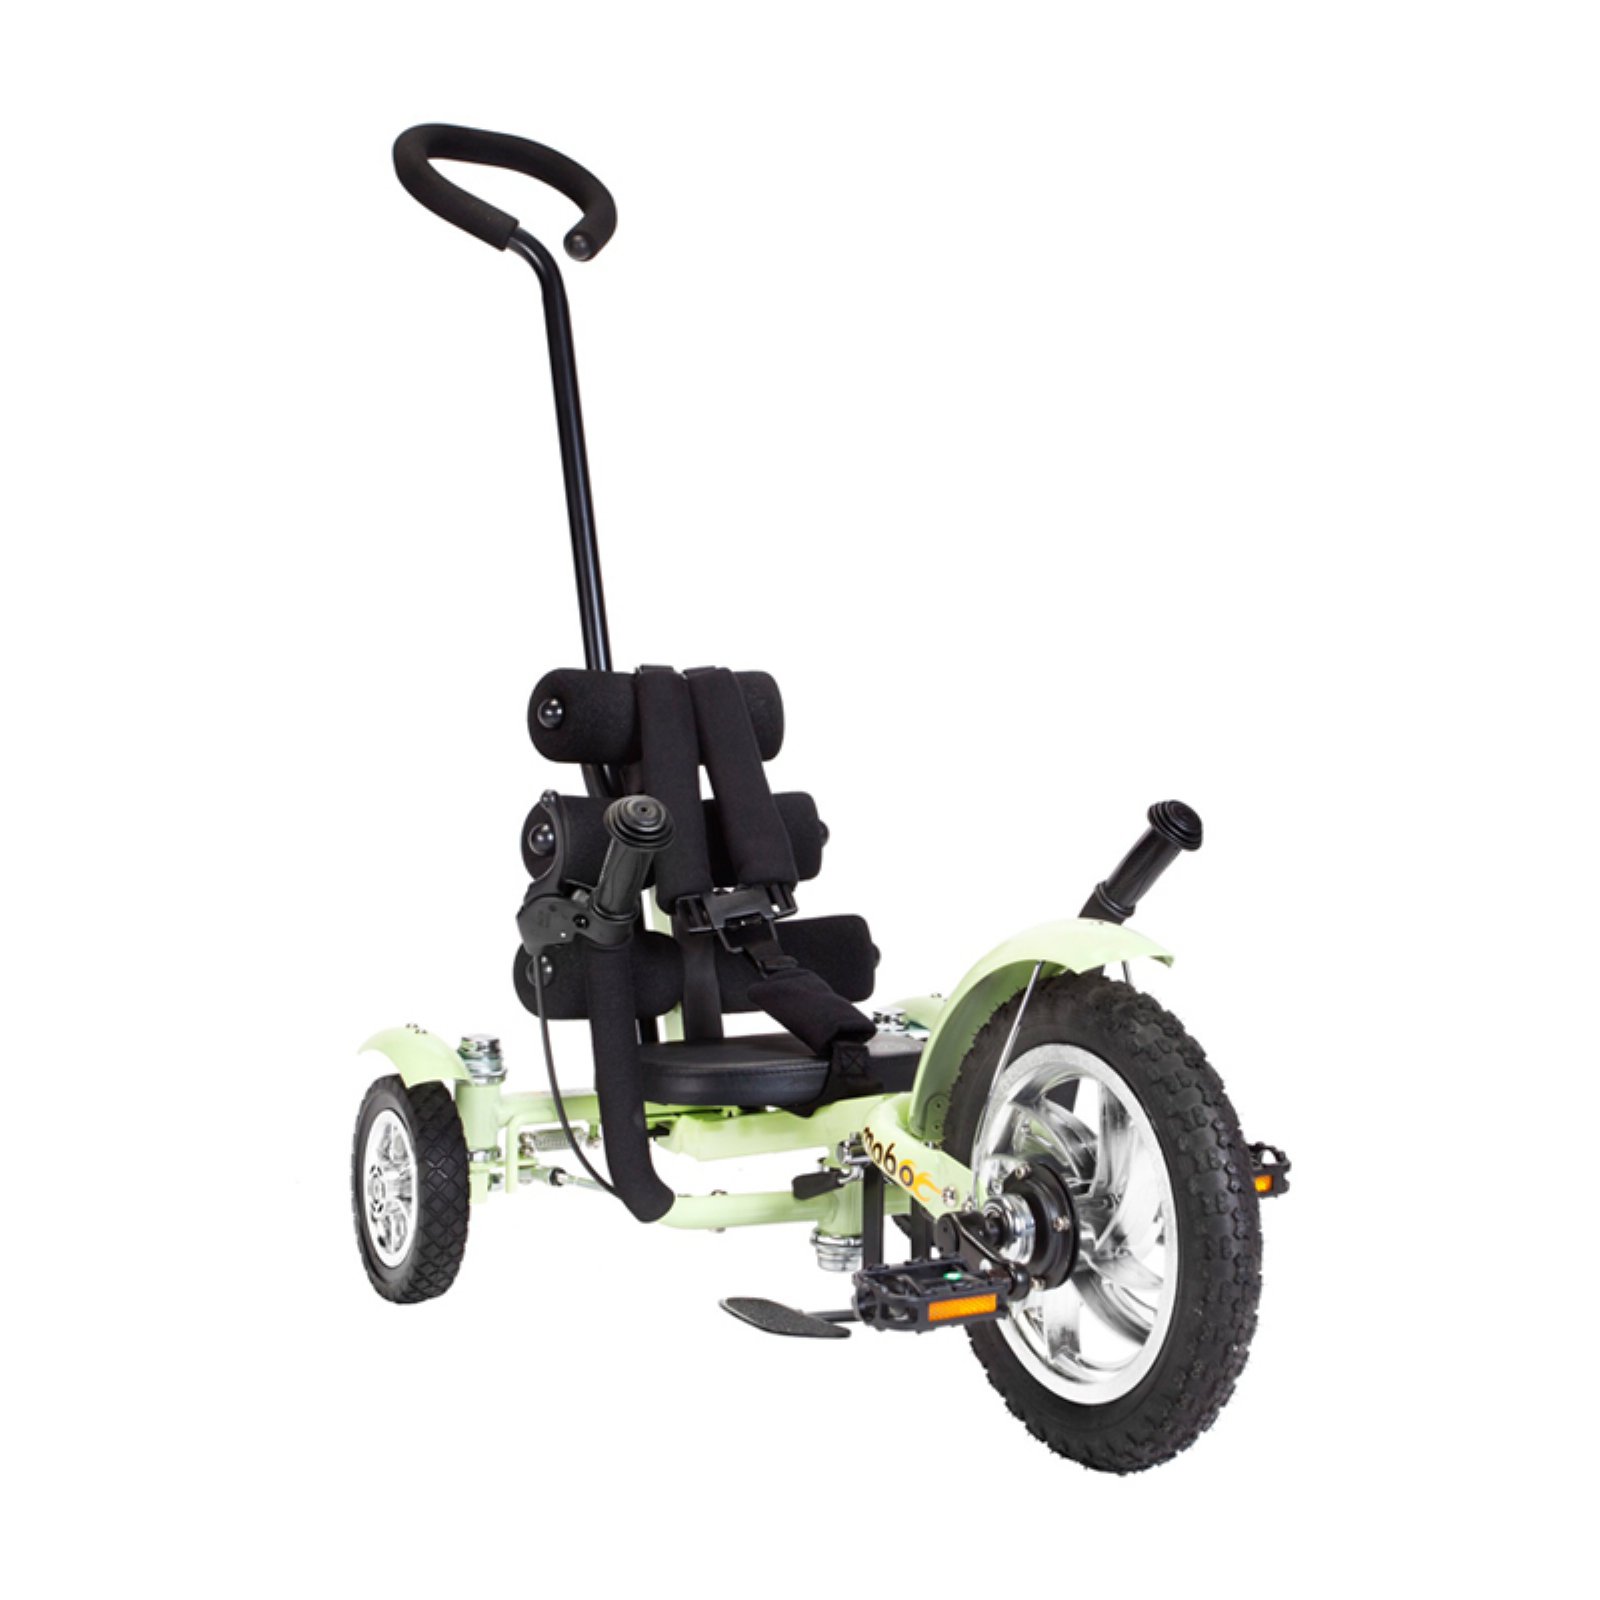 Mobo Mega Mini: The Roll-to-Ride 3-Wheeled Cruiser Tricycle, Push & Pedal Ride On Toy, Green - image 1 of 7